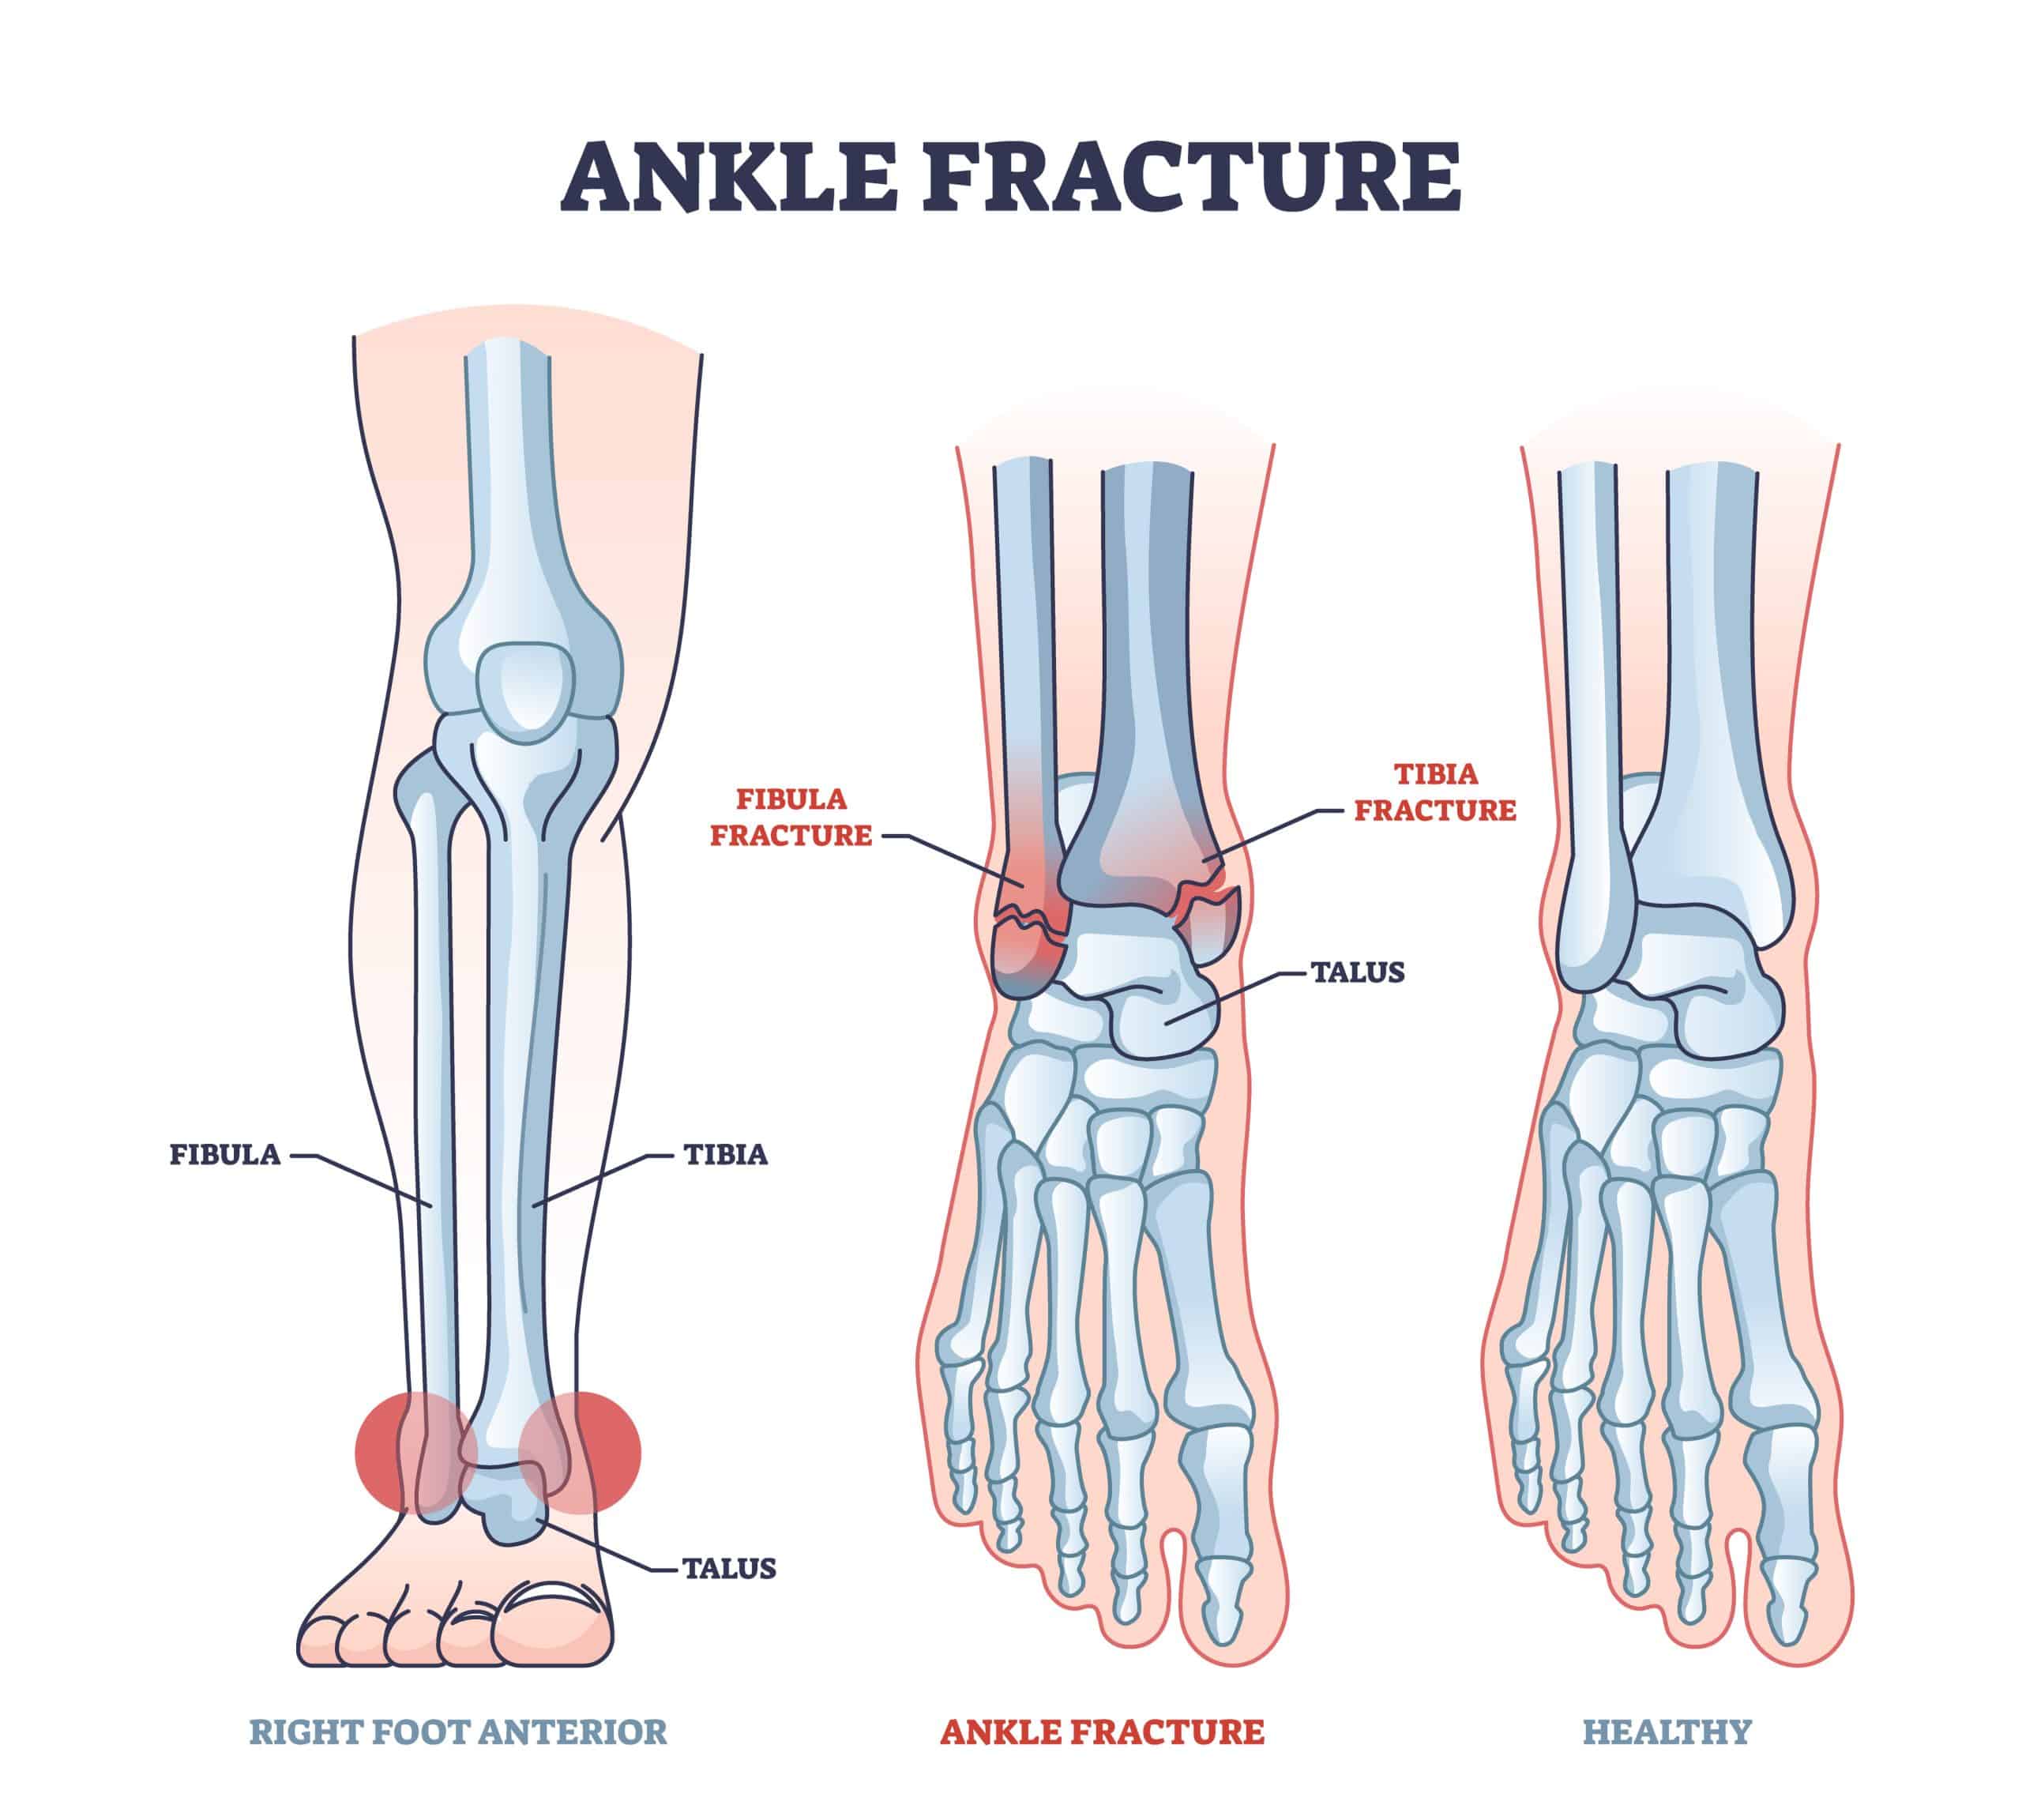 About Ankle Fractures